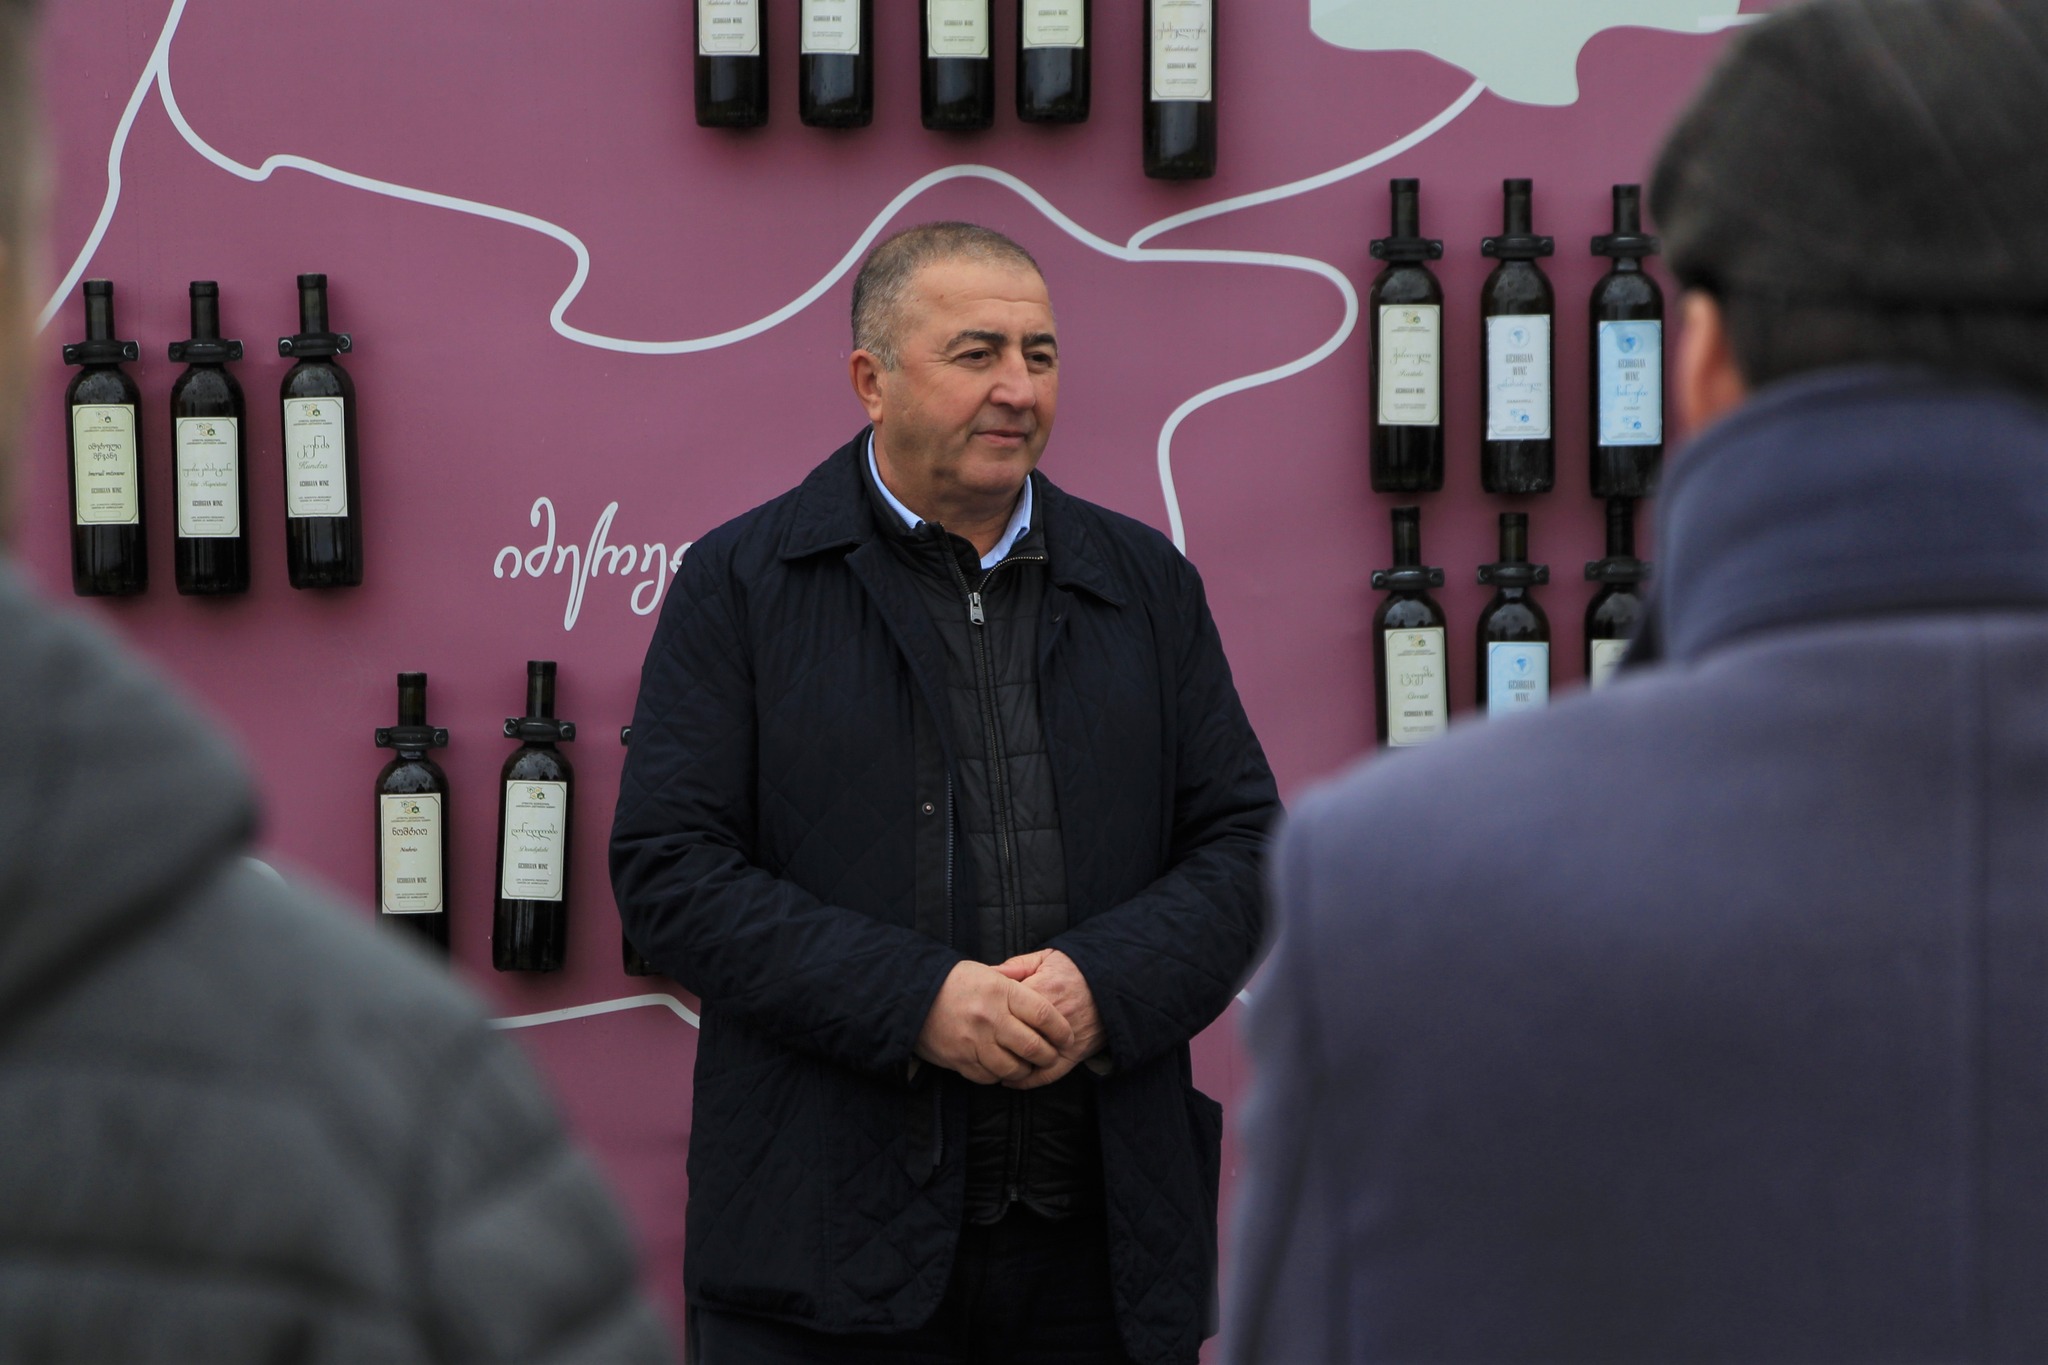 "Georgian wine really has a great potential", says Levan Ujmajuridze, Director of Science&Research Center